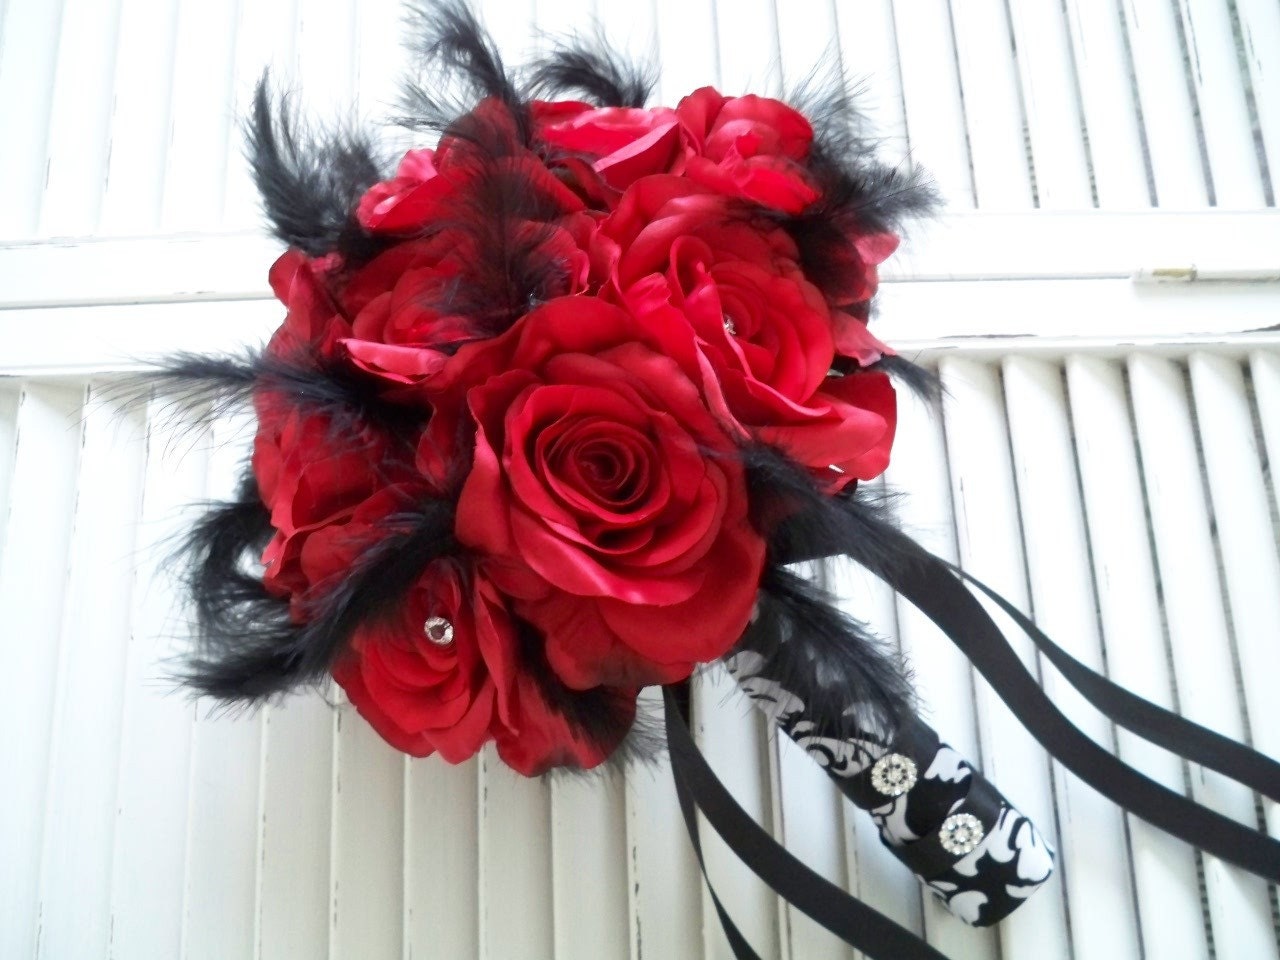 RED ROSES WRAPPED IN  BLACK AND WHITE DAMASK 14 PIECE BRIDAL BOUQUET SET